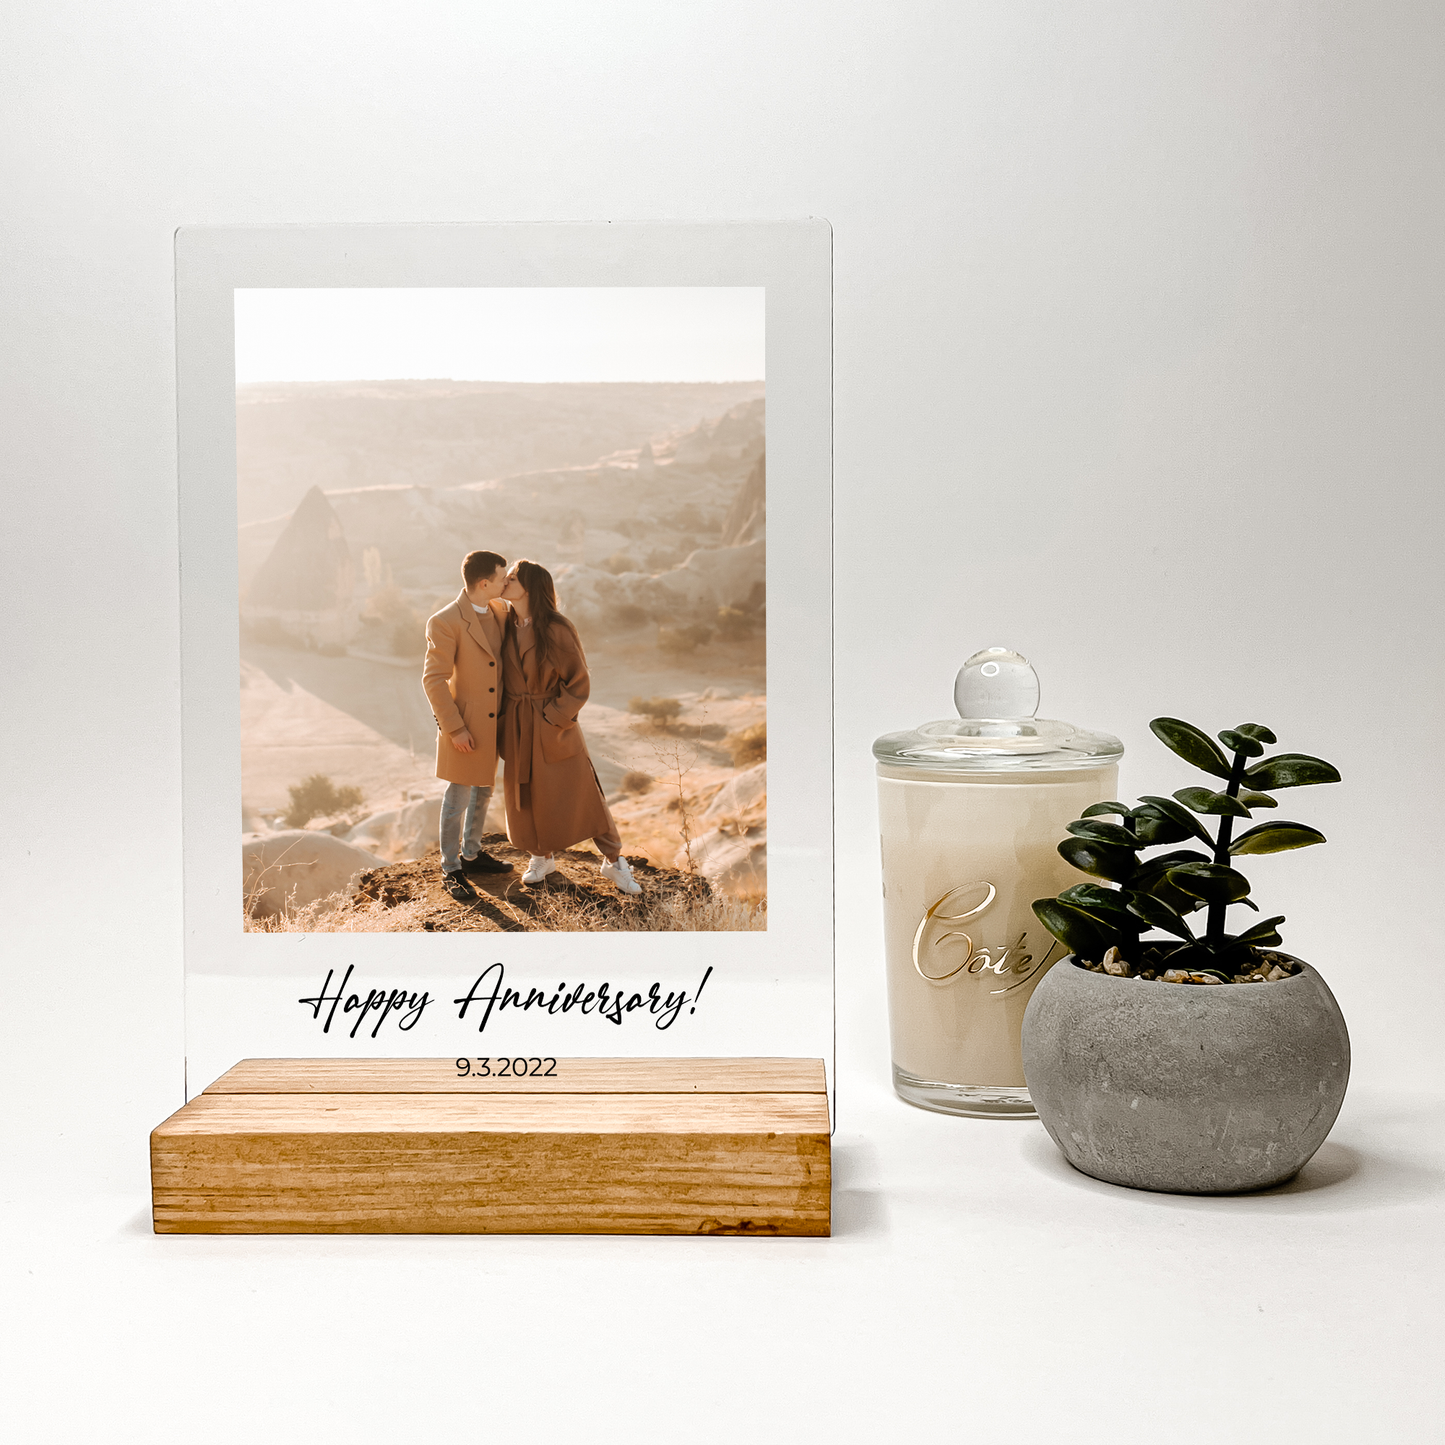 Personalized Custom Photo Couples Collage Wood Base Desk Table Stand